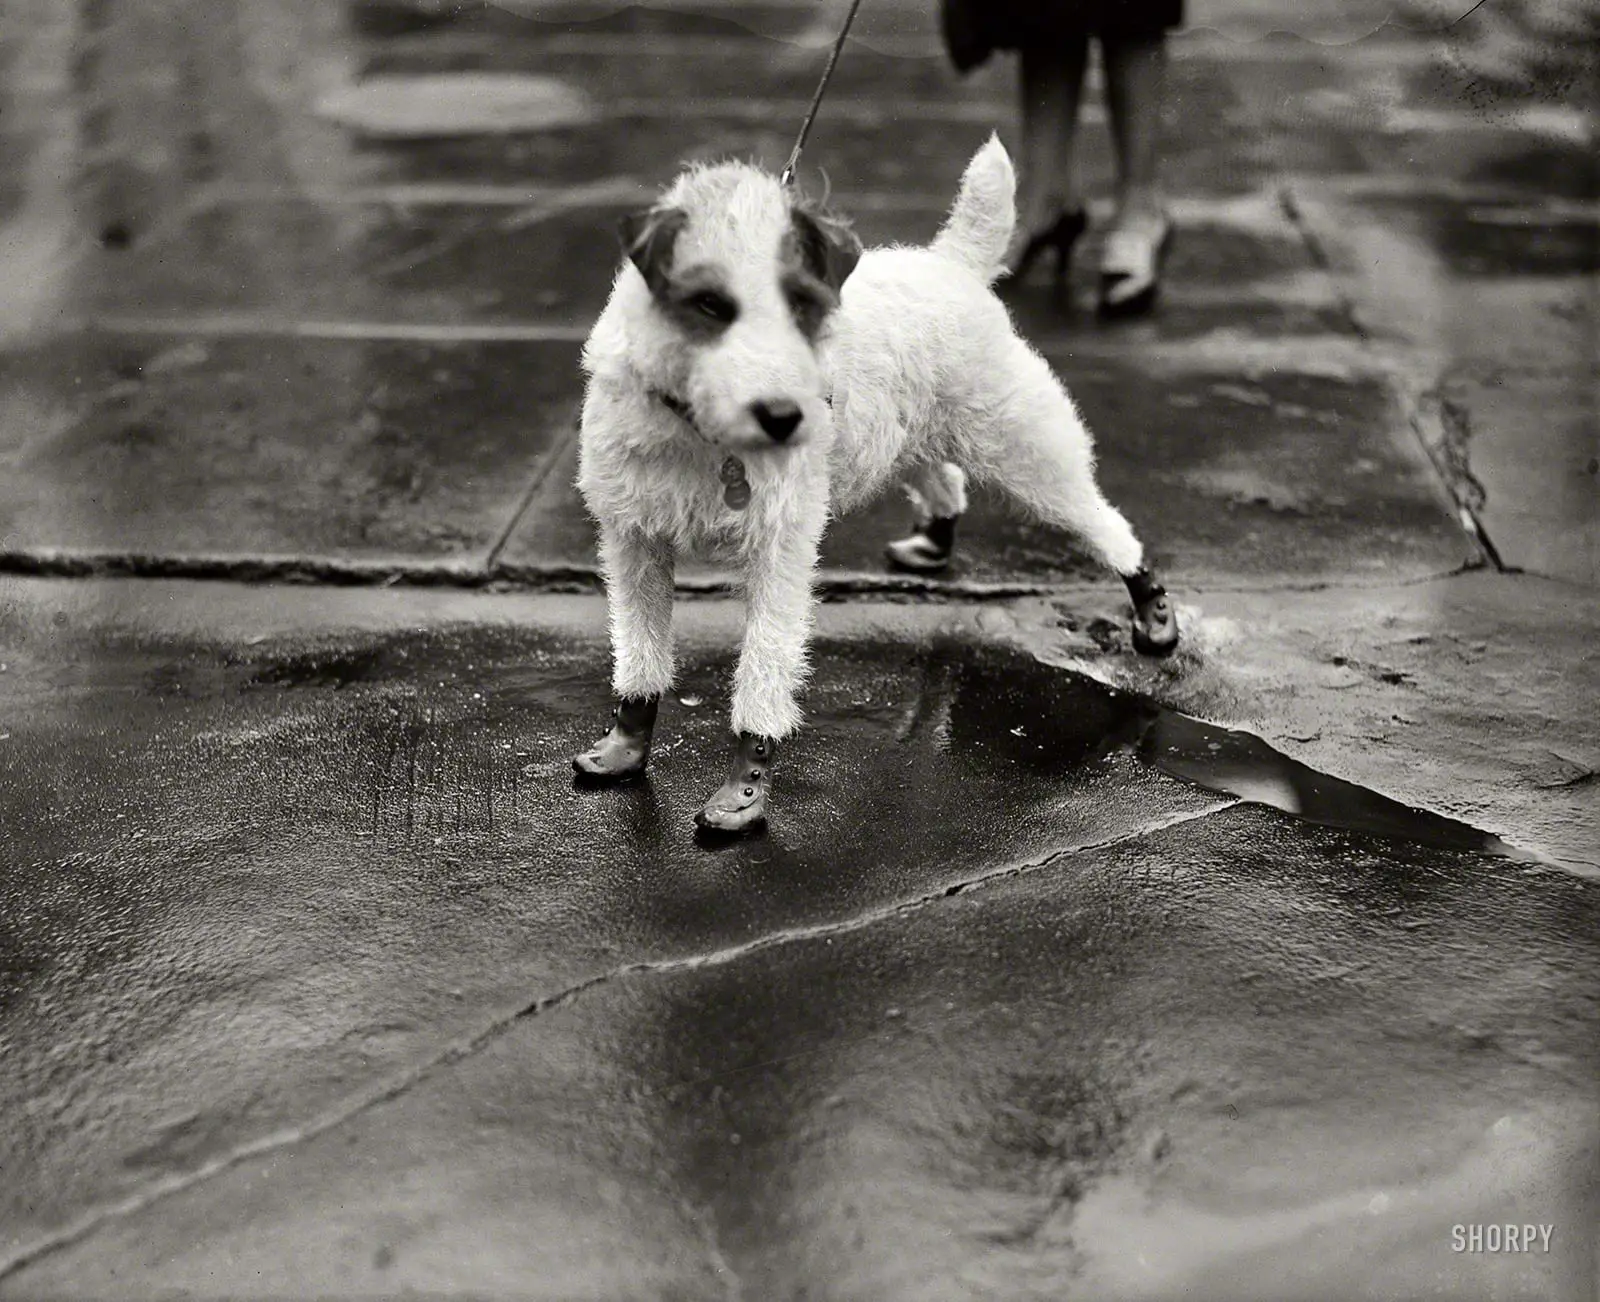 Feb. 9, 1928. Washington, D.C. "Peter Pan, wire-haired terrier pet of the personal secretary to President Coolidge and Mrs. Edward T. Clark, arrived at the White House today attired in 'flapper galoshes'."